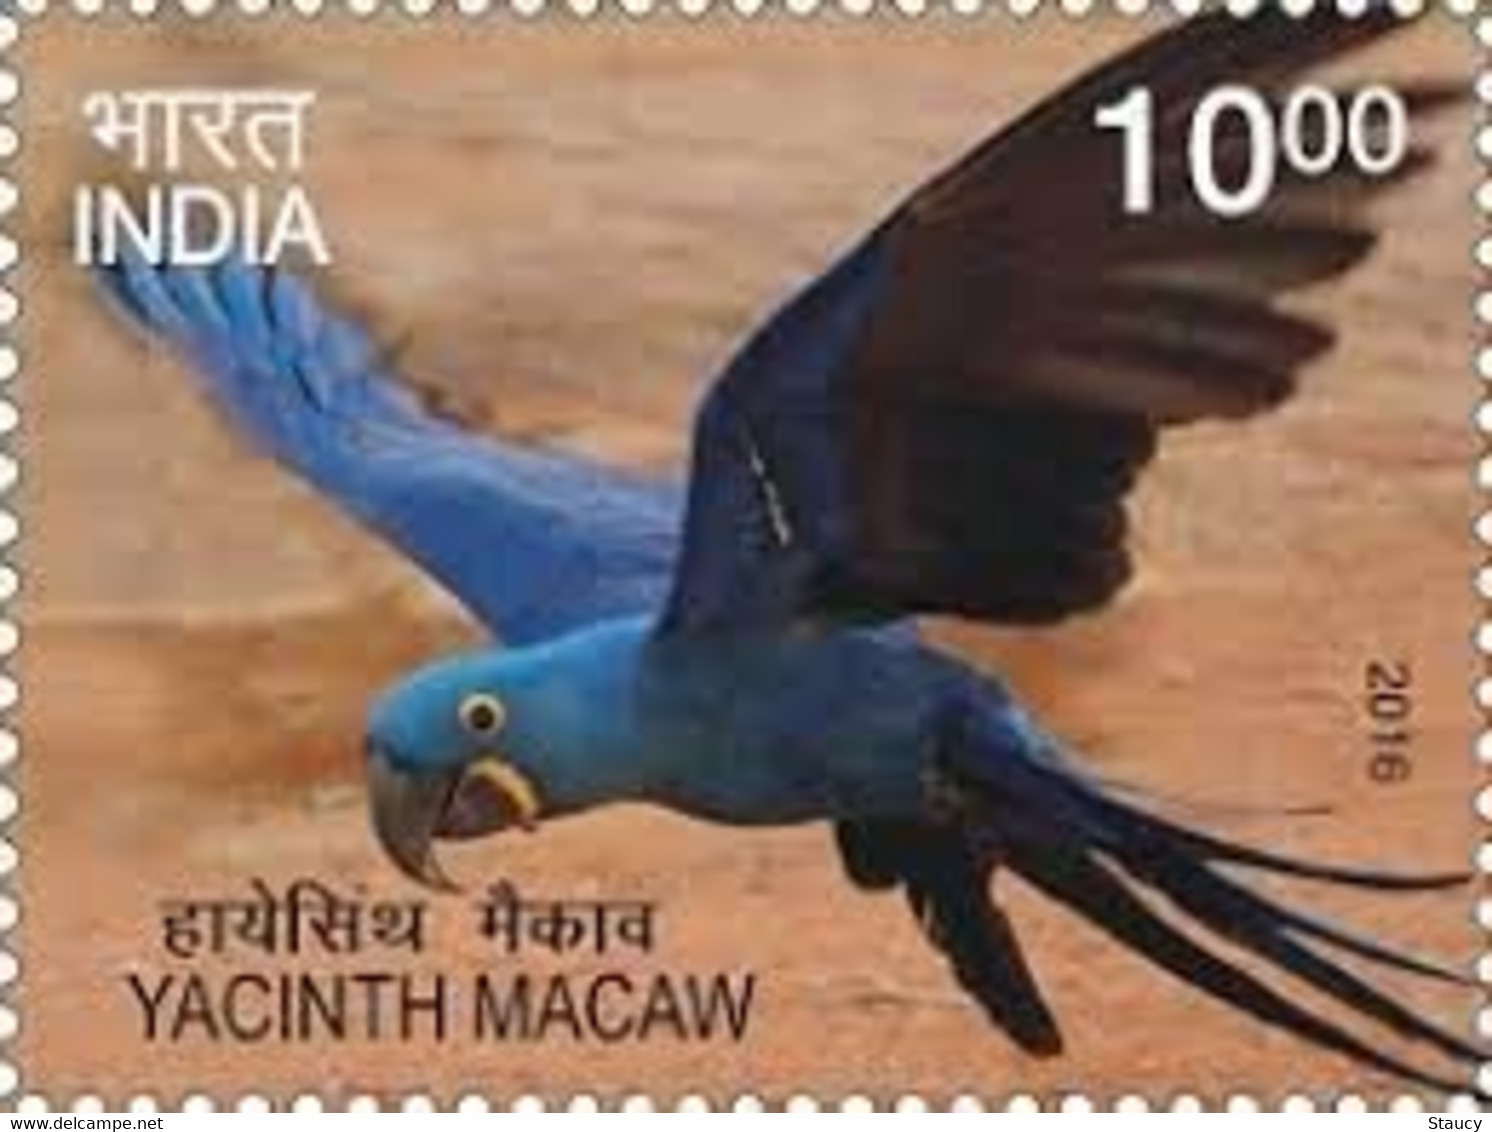 India 2016 Exotic Birds 1v Stamp MNH Macaw Parrot Amazon Crested, As Per Scan - Cuco, Cuclillos